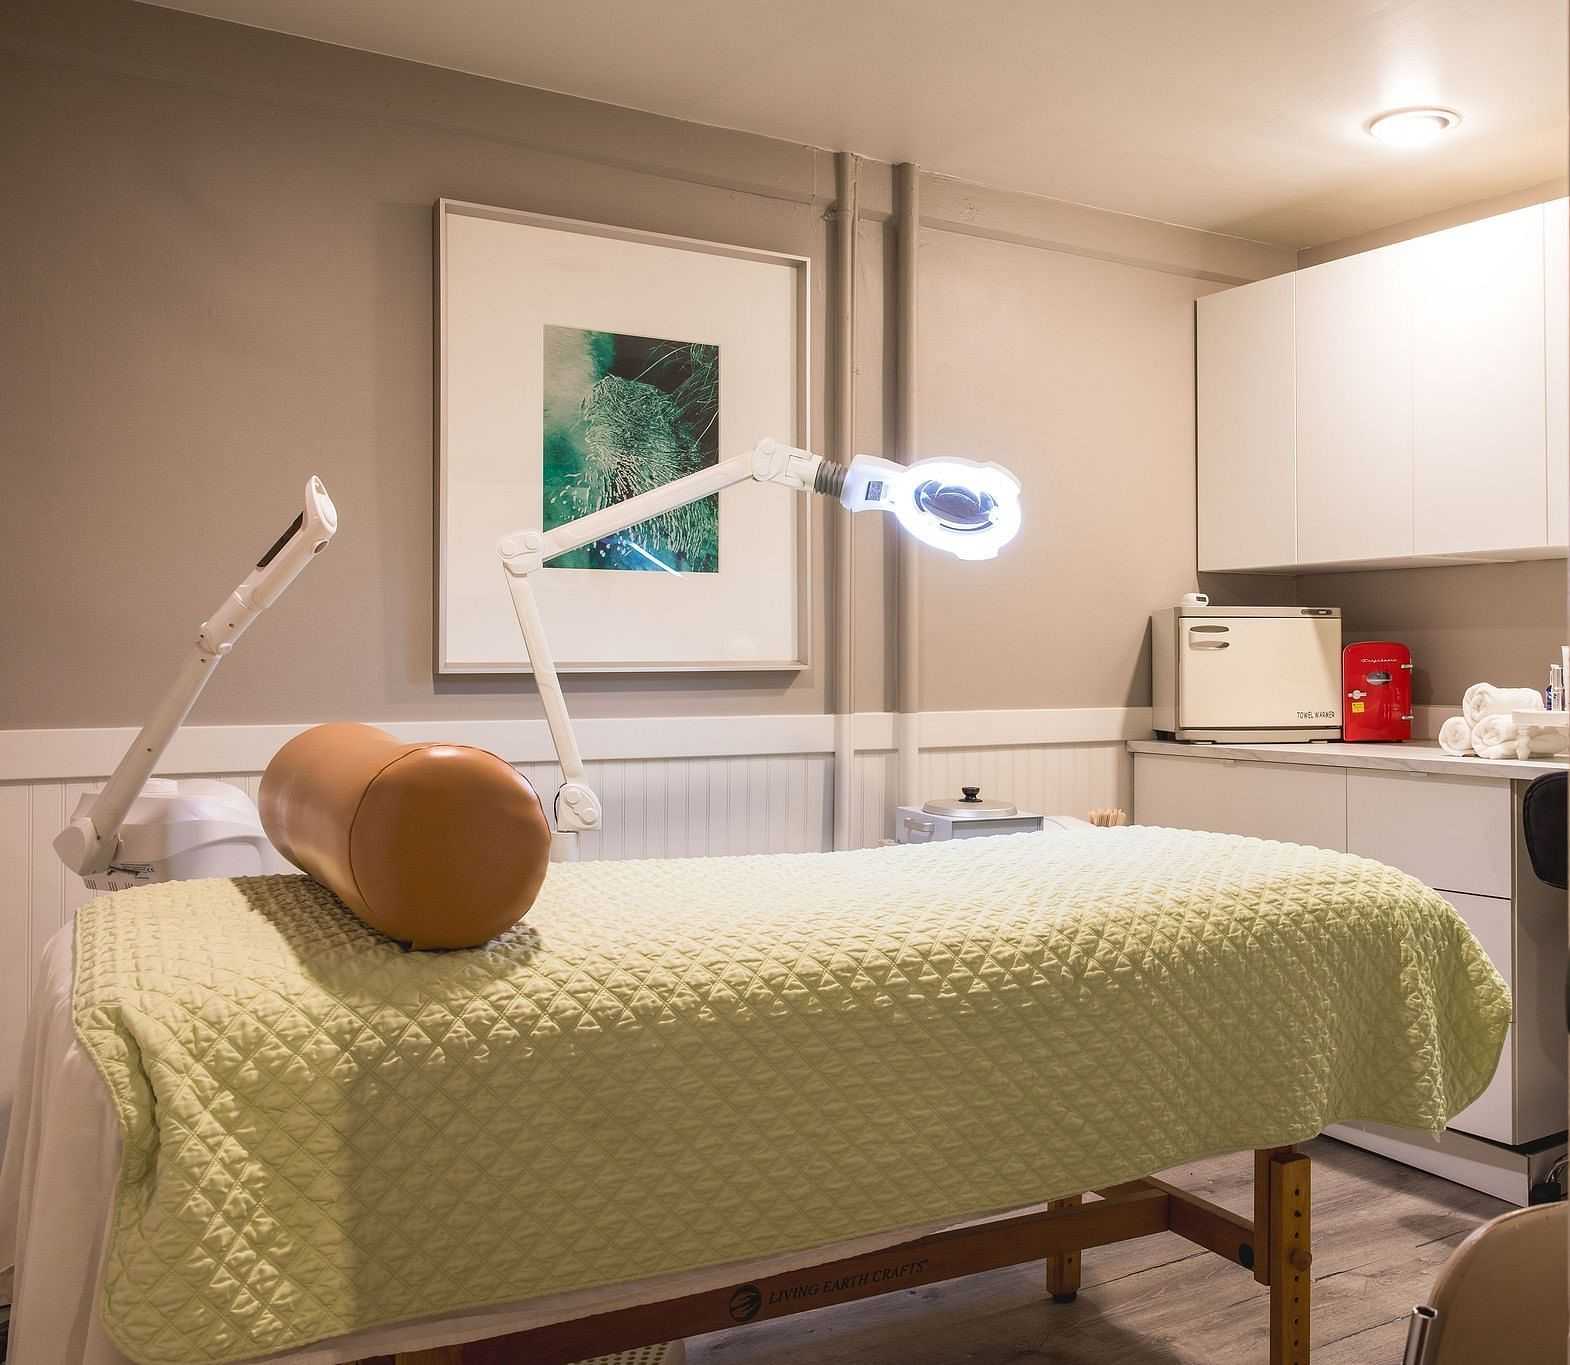 Treatment room with a massage table, lamp, and medical equipment on a counter.